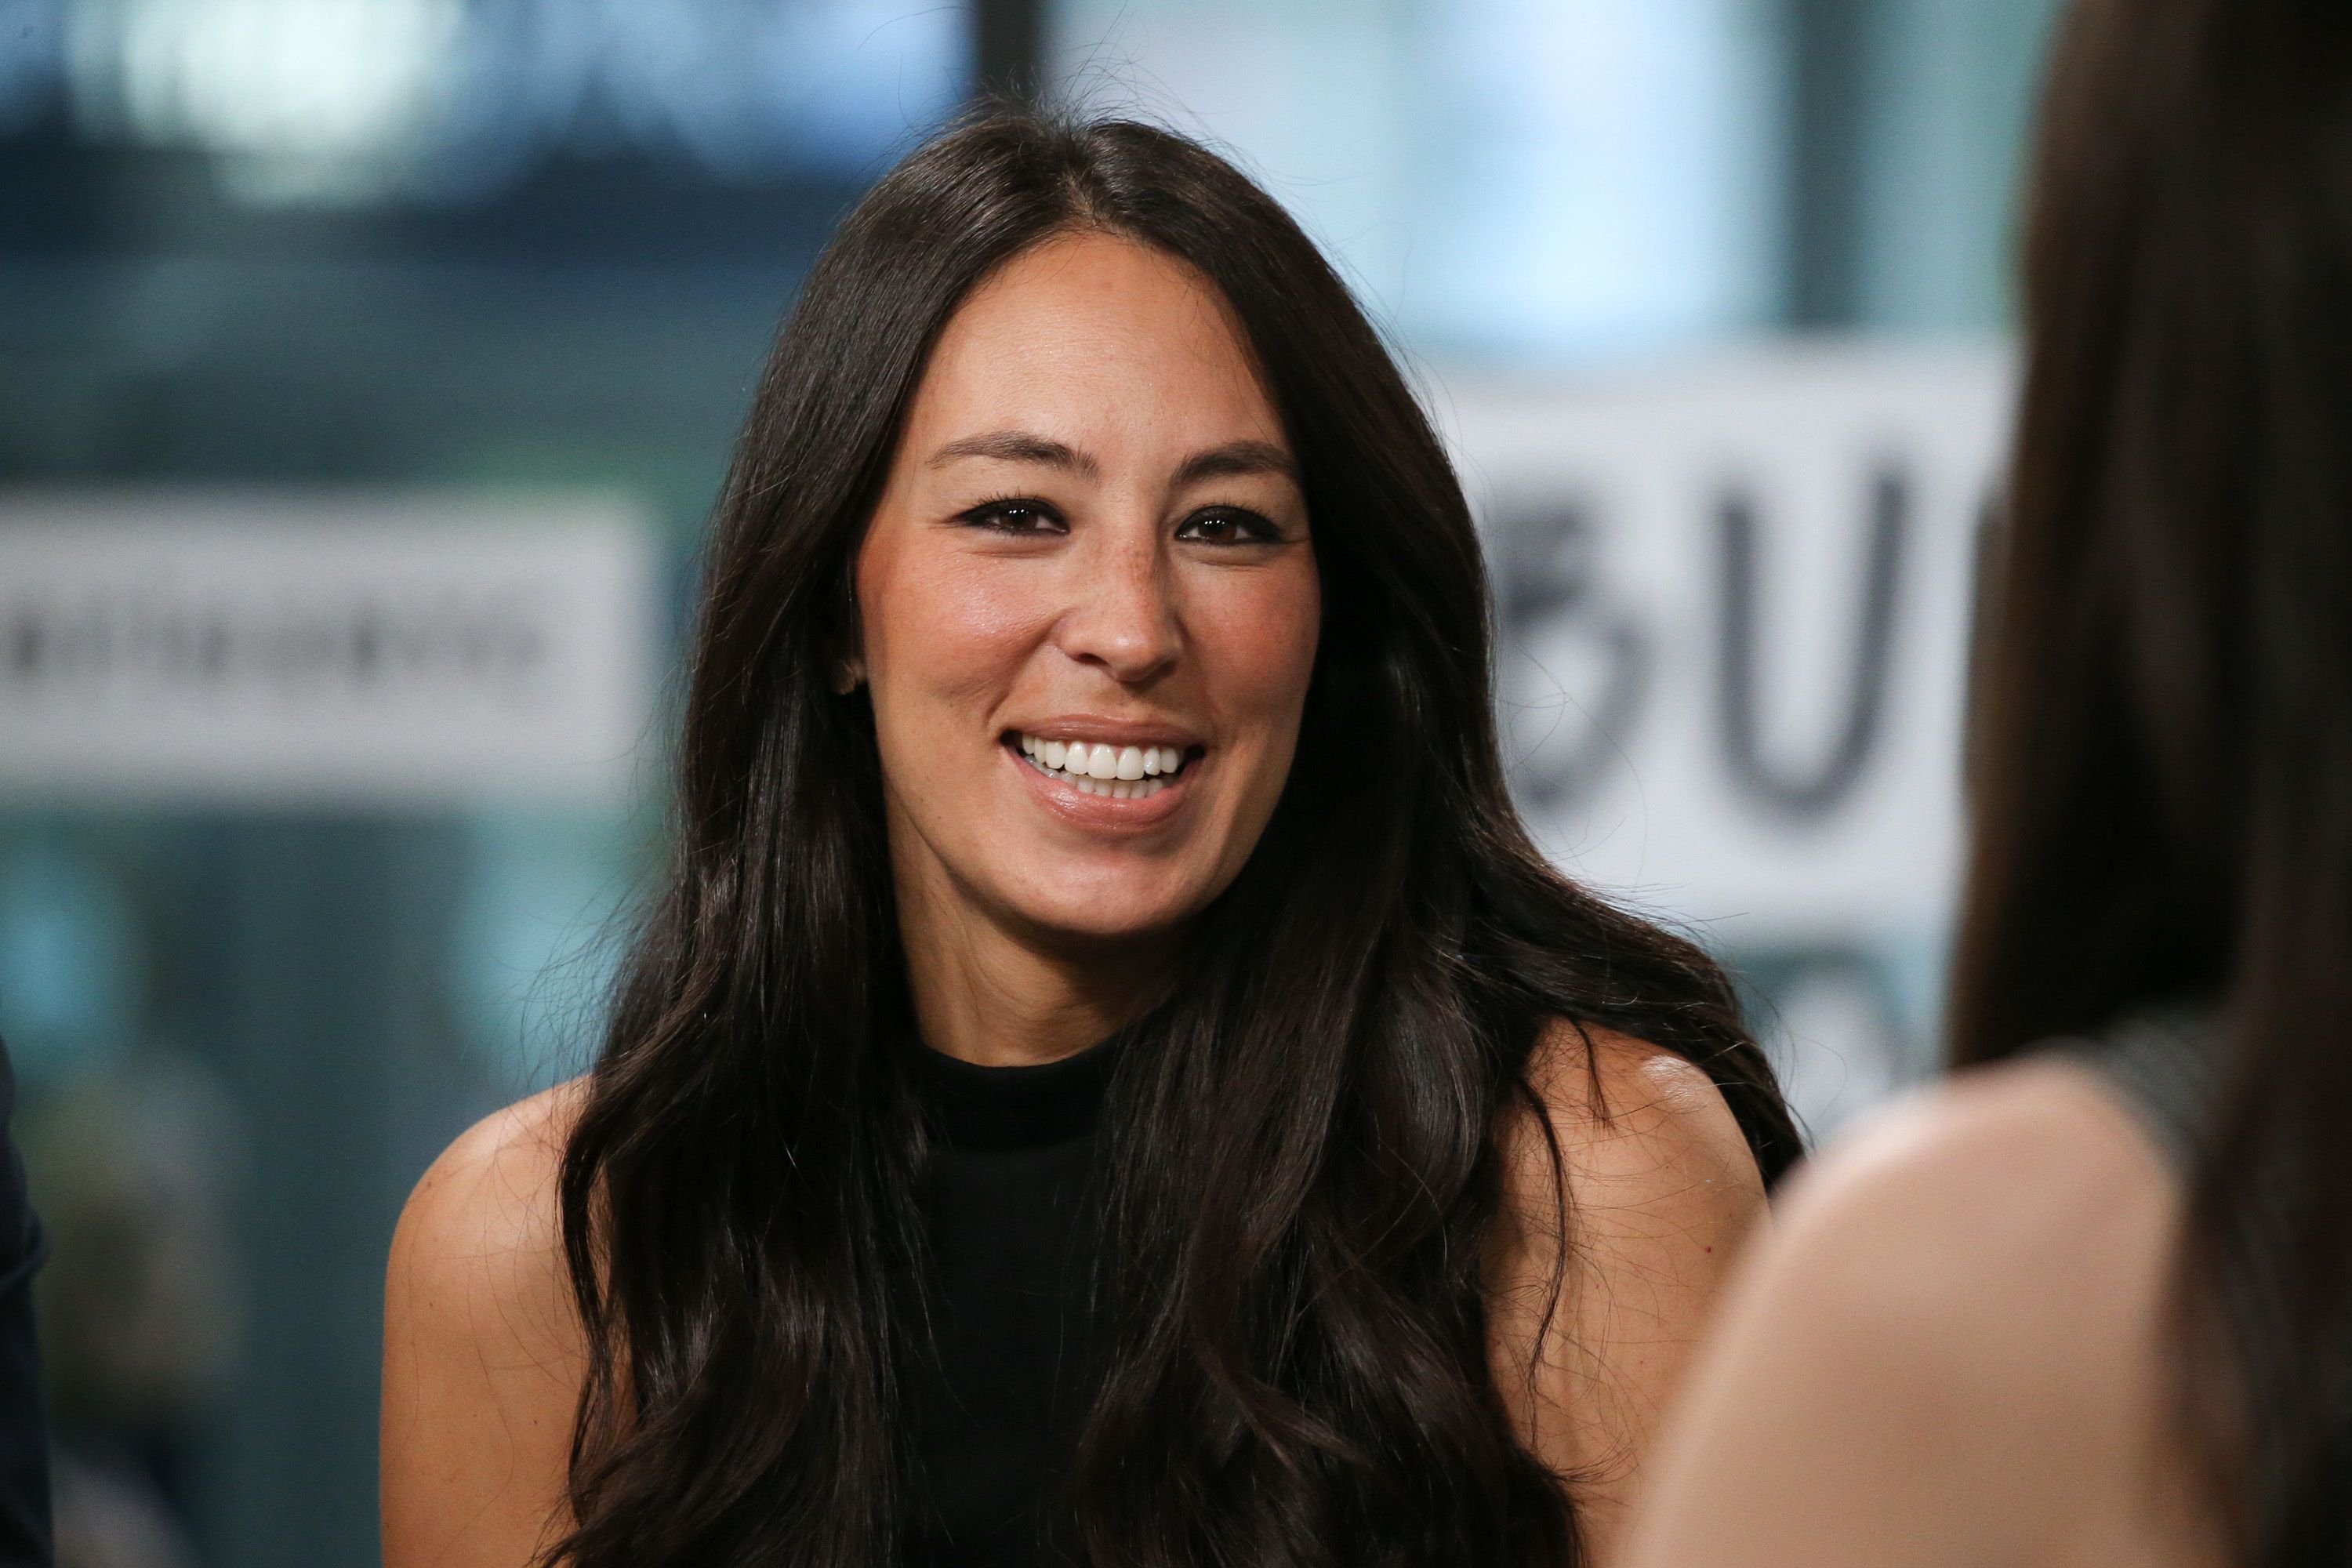 Joanna Gaines discusses her book, "Capital Gaines: Smart Things I Learned Doing Stupid Stuff"  on October 18, 2017 | Photo: Getty Images